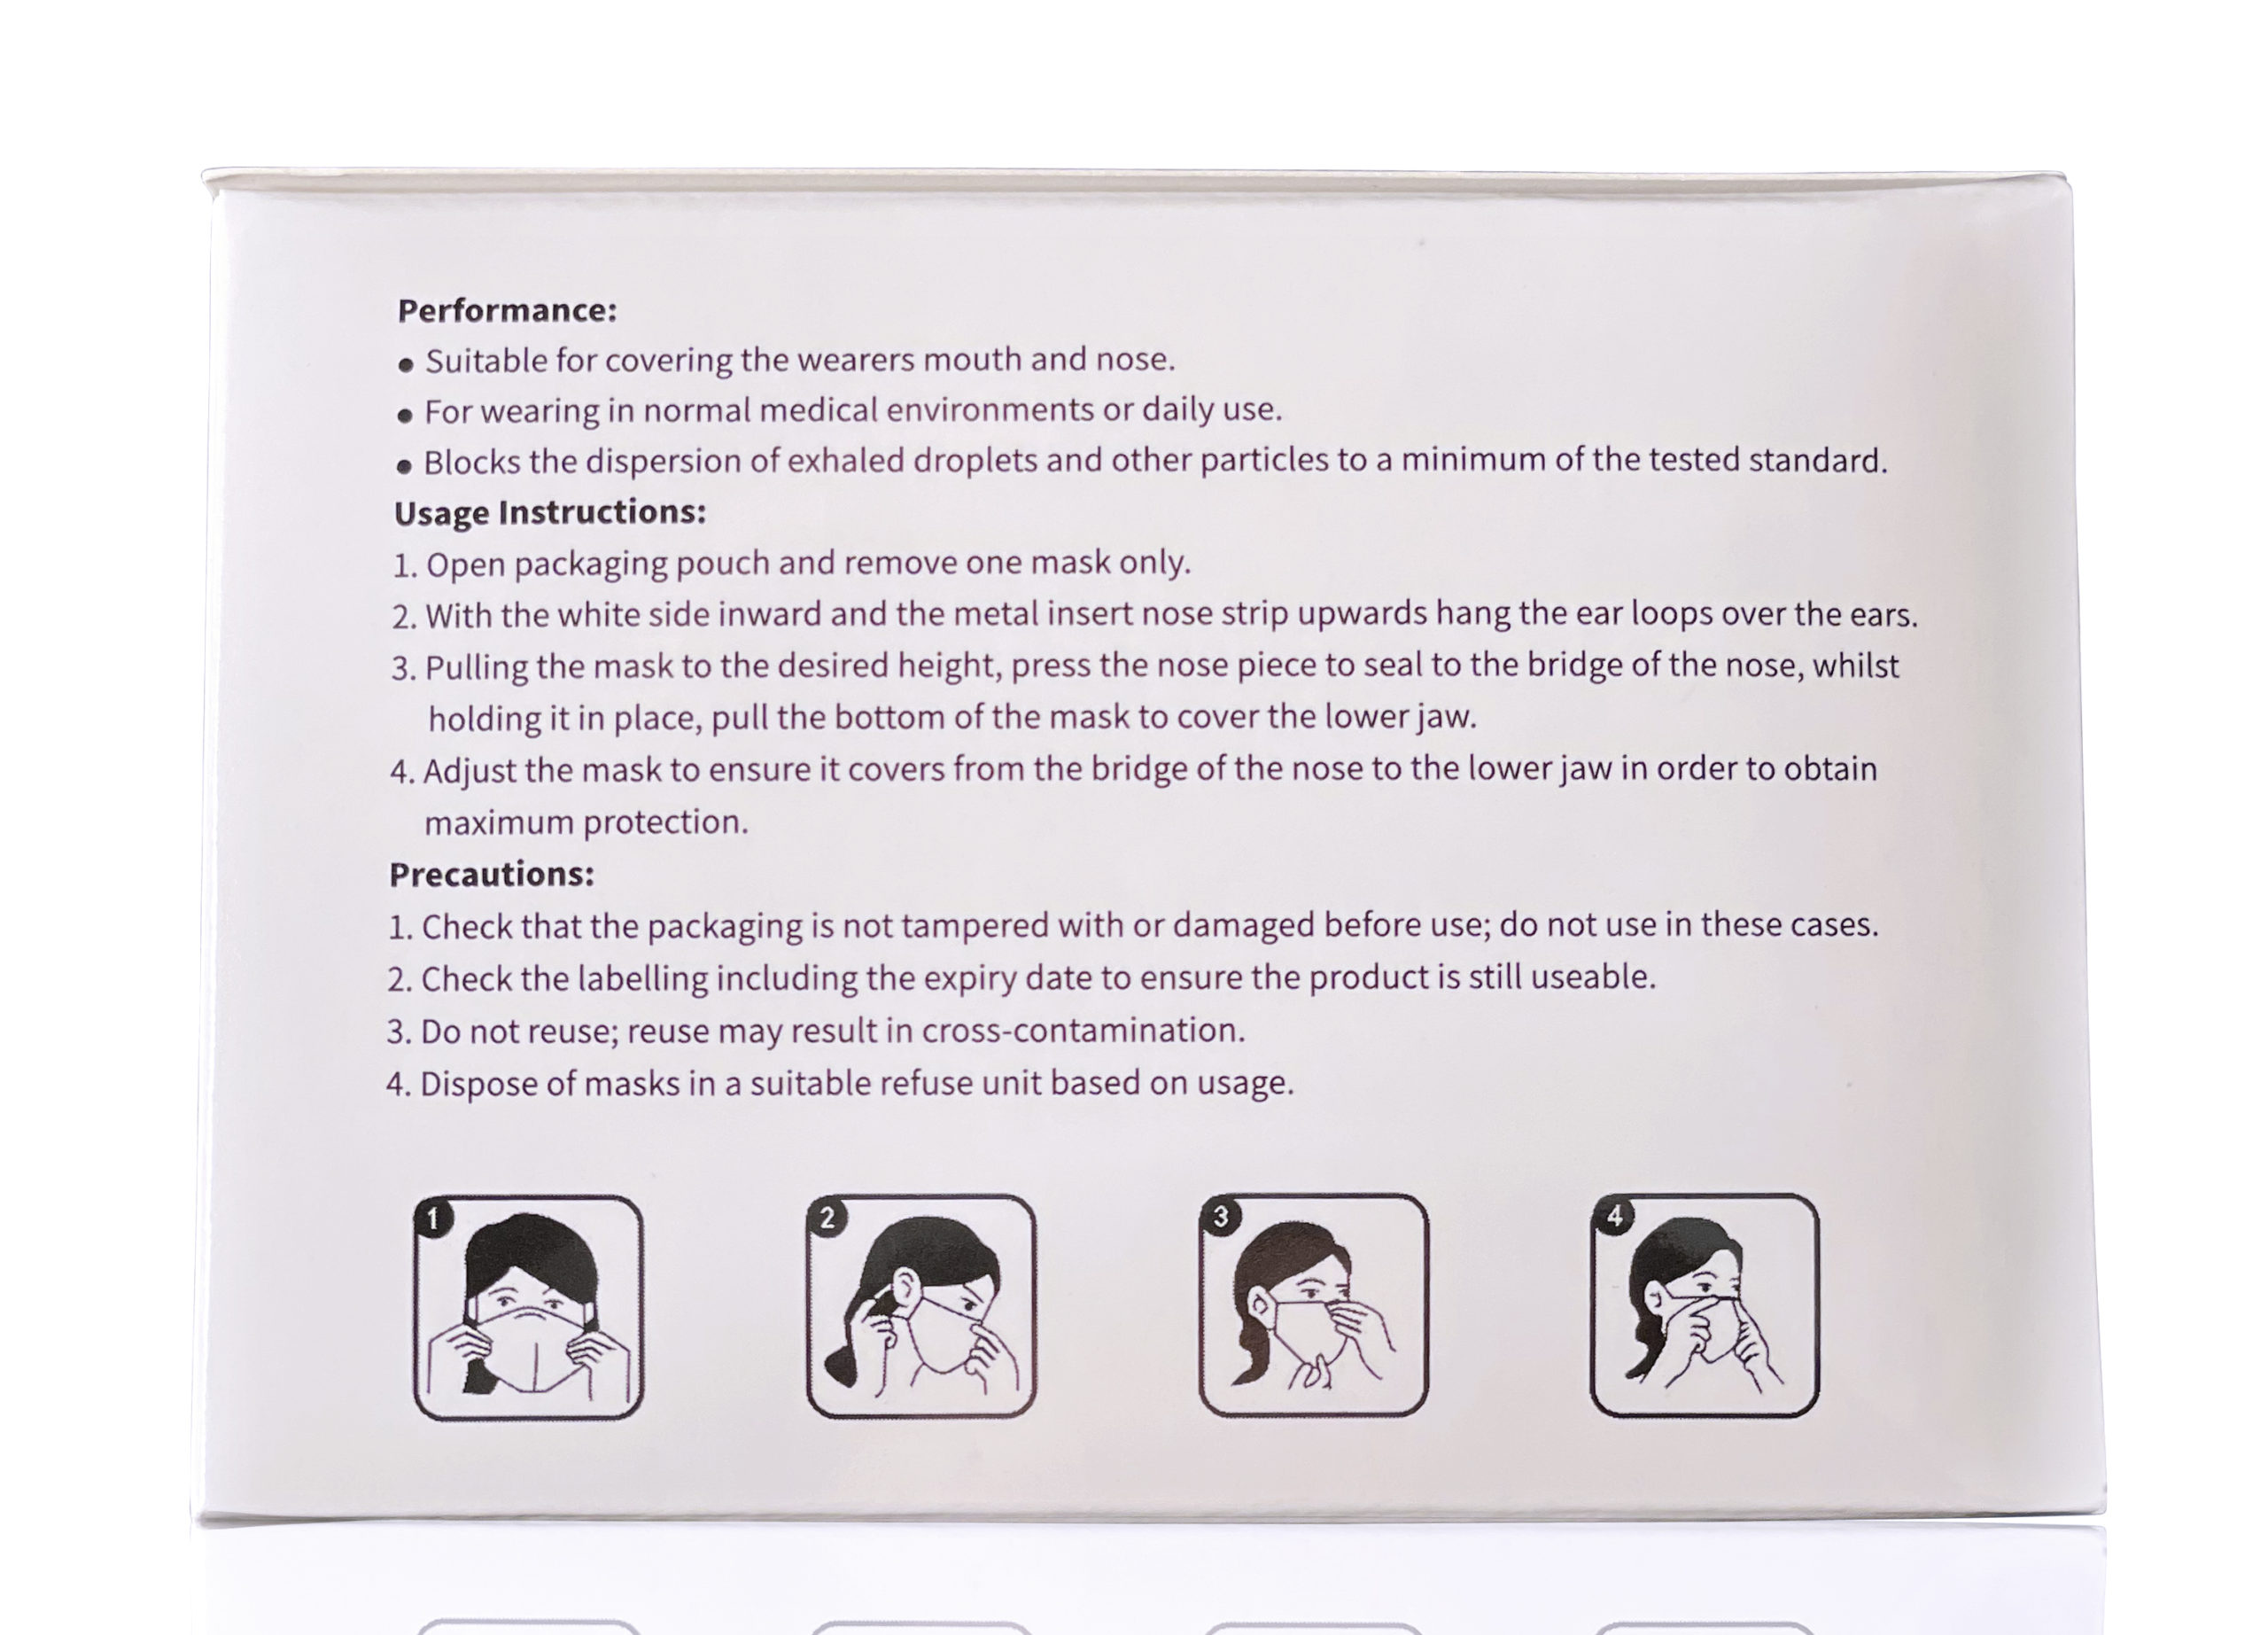 Orchid EU 3 Ply Masks Instructions Panel